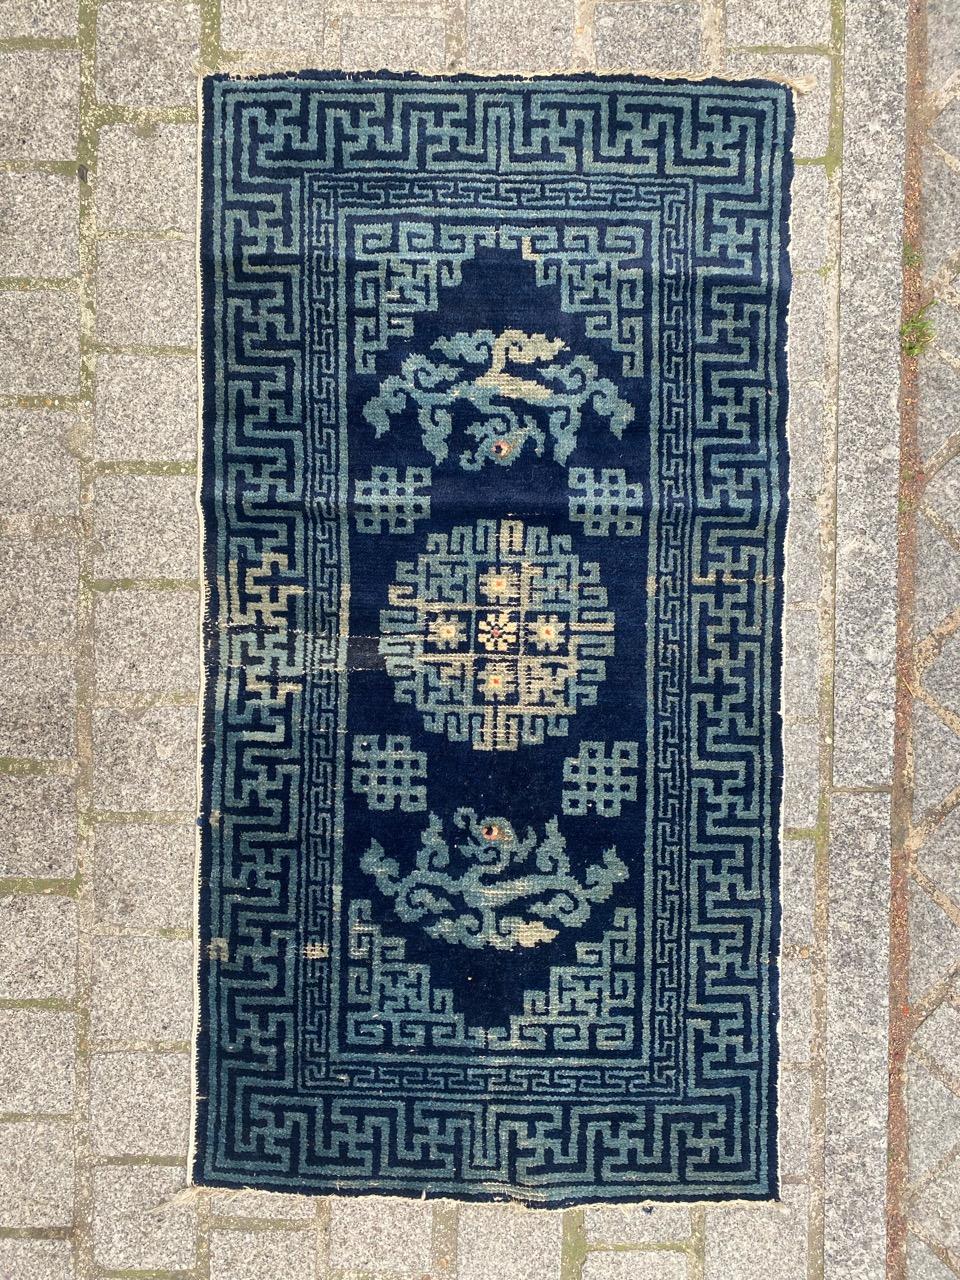 Exquisite small Chinese rug from late 19th century Beijing. Hand-knotted with wool on cotton, this rug features a stunning Chinese design. A decorative medallion with sky-blue lines and stylized flowers is set against a deep midnight blue